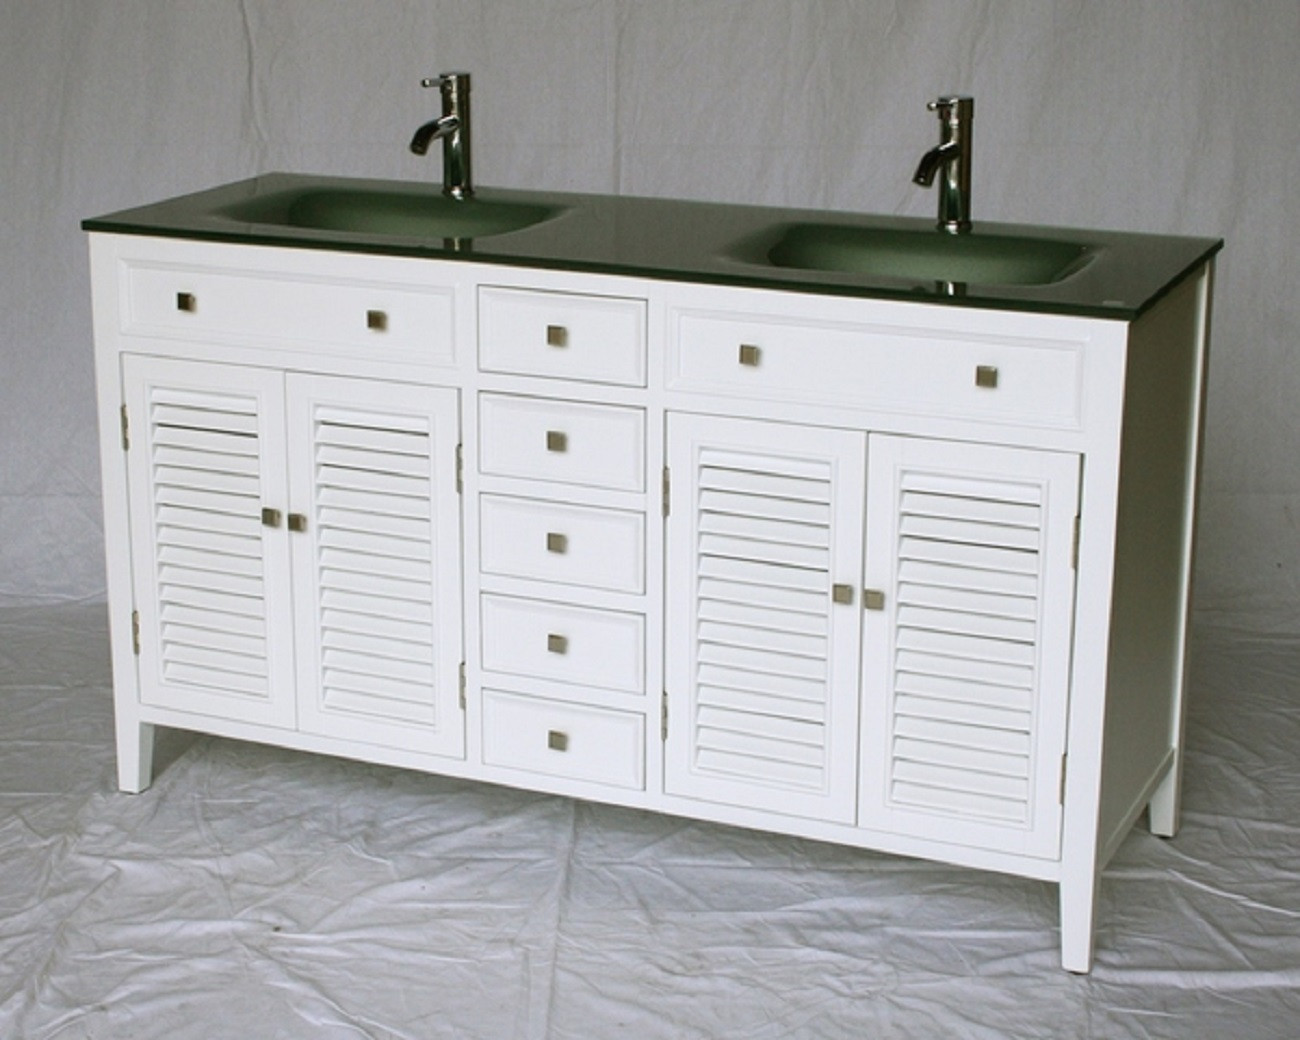 21 Inch Bathroom Vanity
 60 inch Bathroom Vanity Glass Top Double Sink White Color